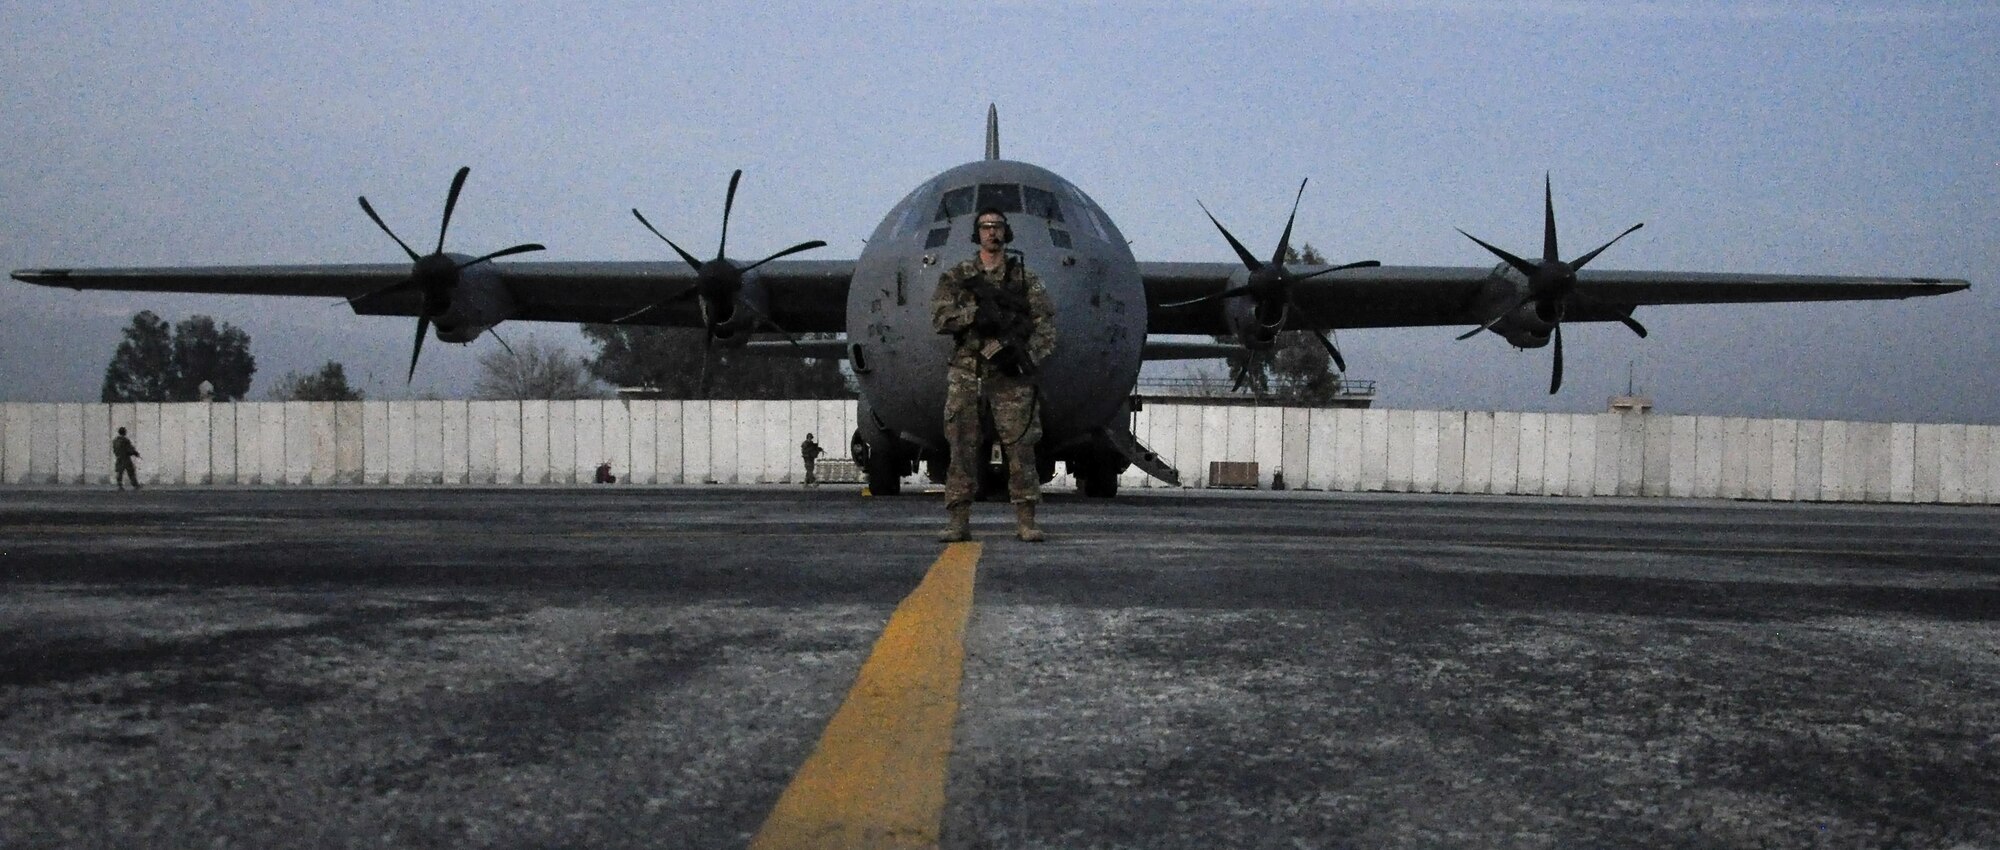 Staff Sgt. Tyler Berogan, 455th Expeditionary Security Forces Squadron Fly Away Security Team squad lead, deployed from Offutt Air Force Base, Neb., secures a C-130 Hercules during a mission to Jalalabad Airfield, Afghanistan Dec. 18, 2015. The 455th ESFS FAST is the all-encompassing security team that provides ground safety and cockpit denial to protect the aircraft and crew. (U.S. Air Force photo by Tech. Sgt. Nicholas Rau)